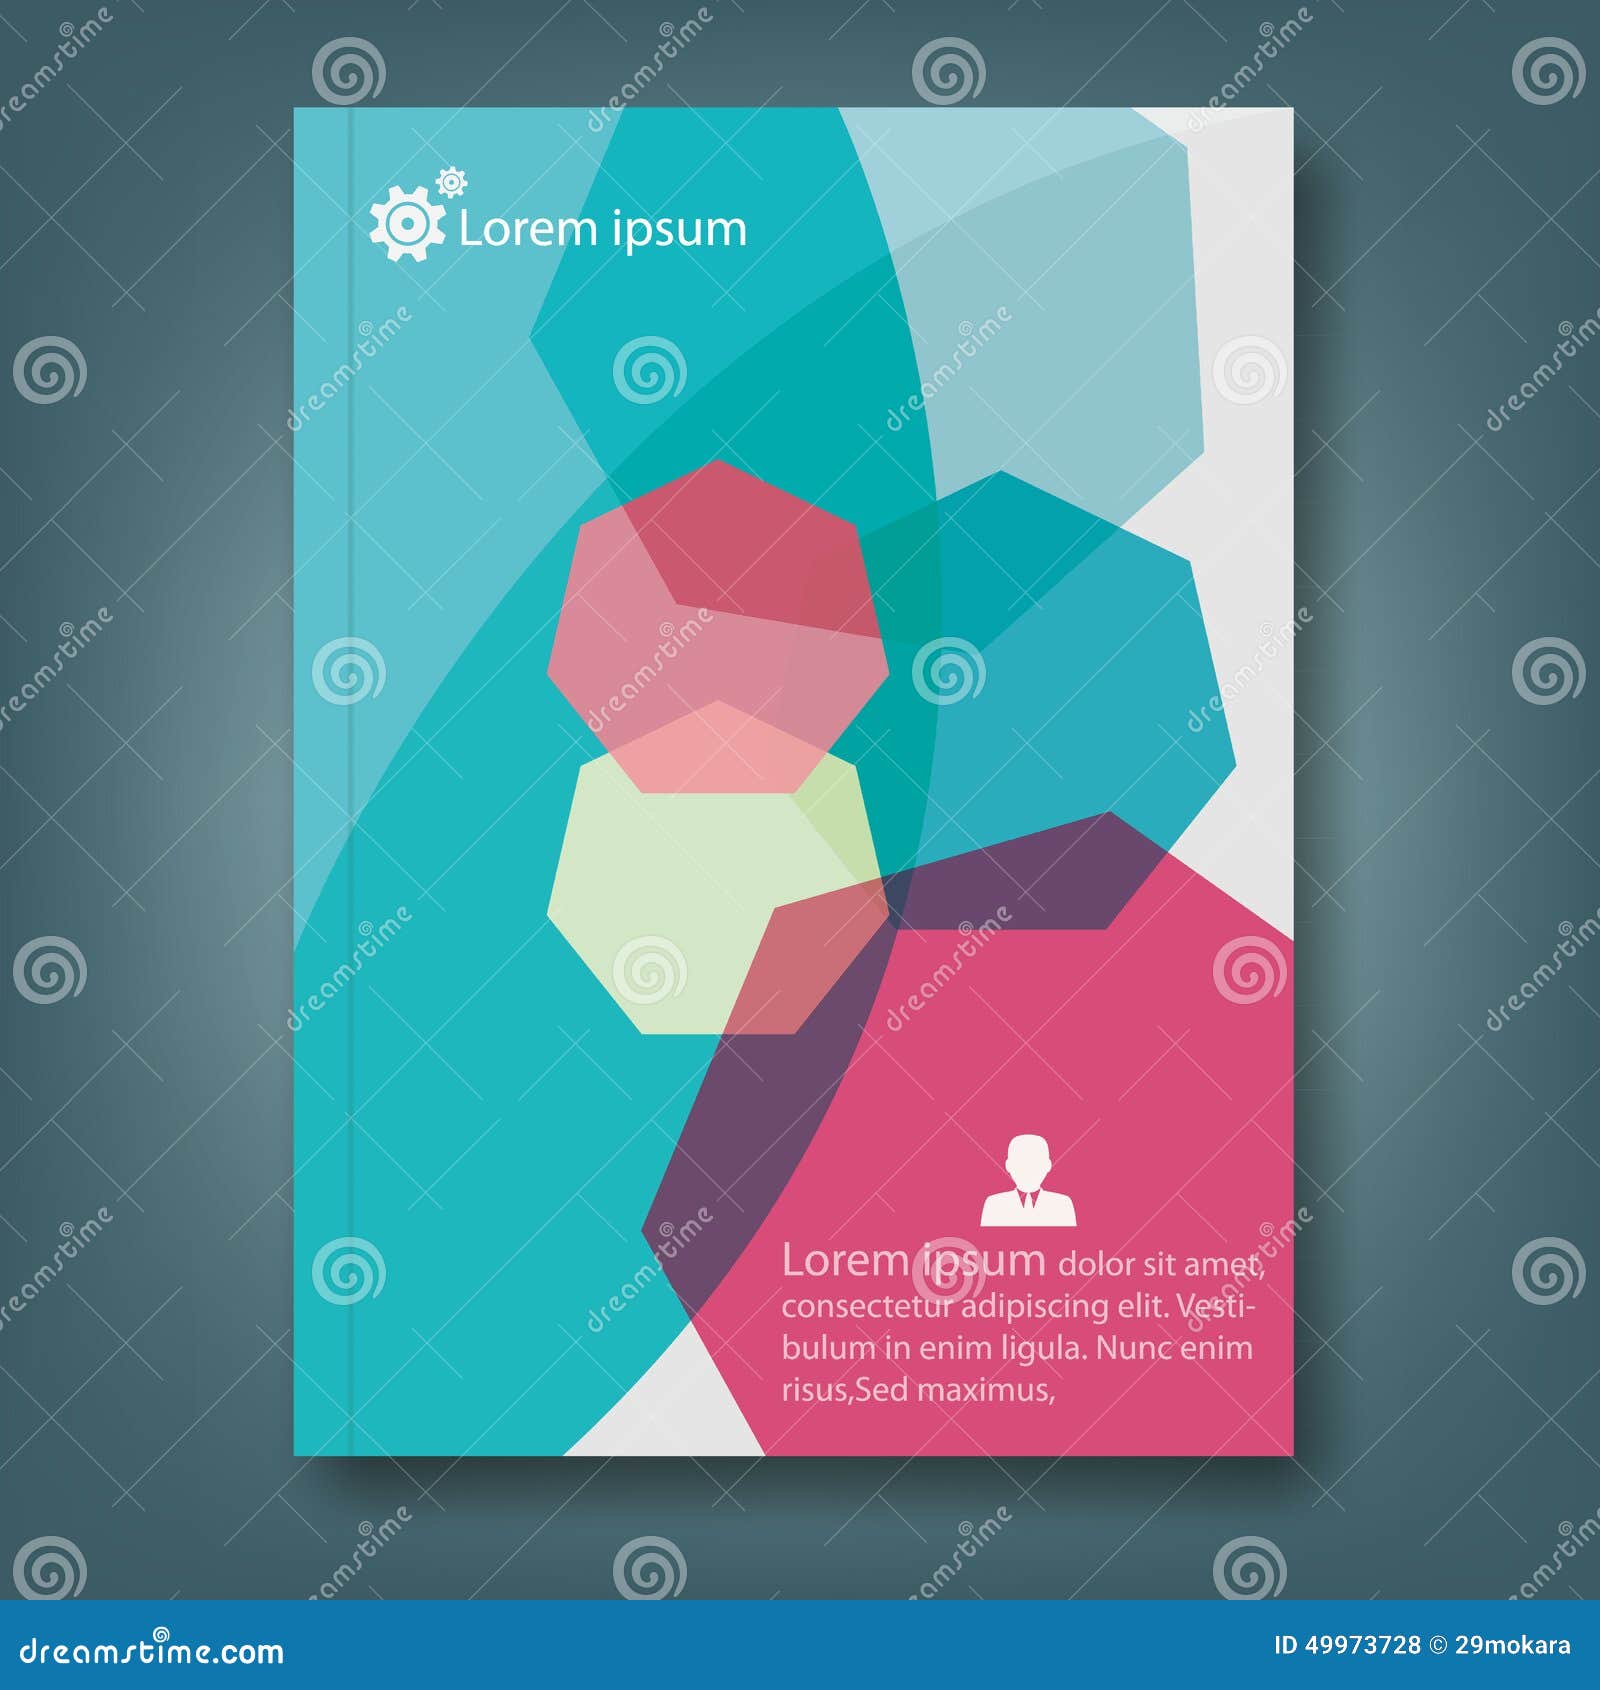 Report And Cover Book Template Stock Vector Illustration Of Book Illustration 49973728